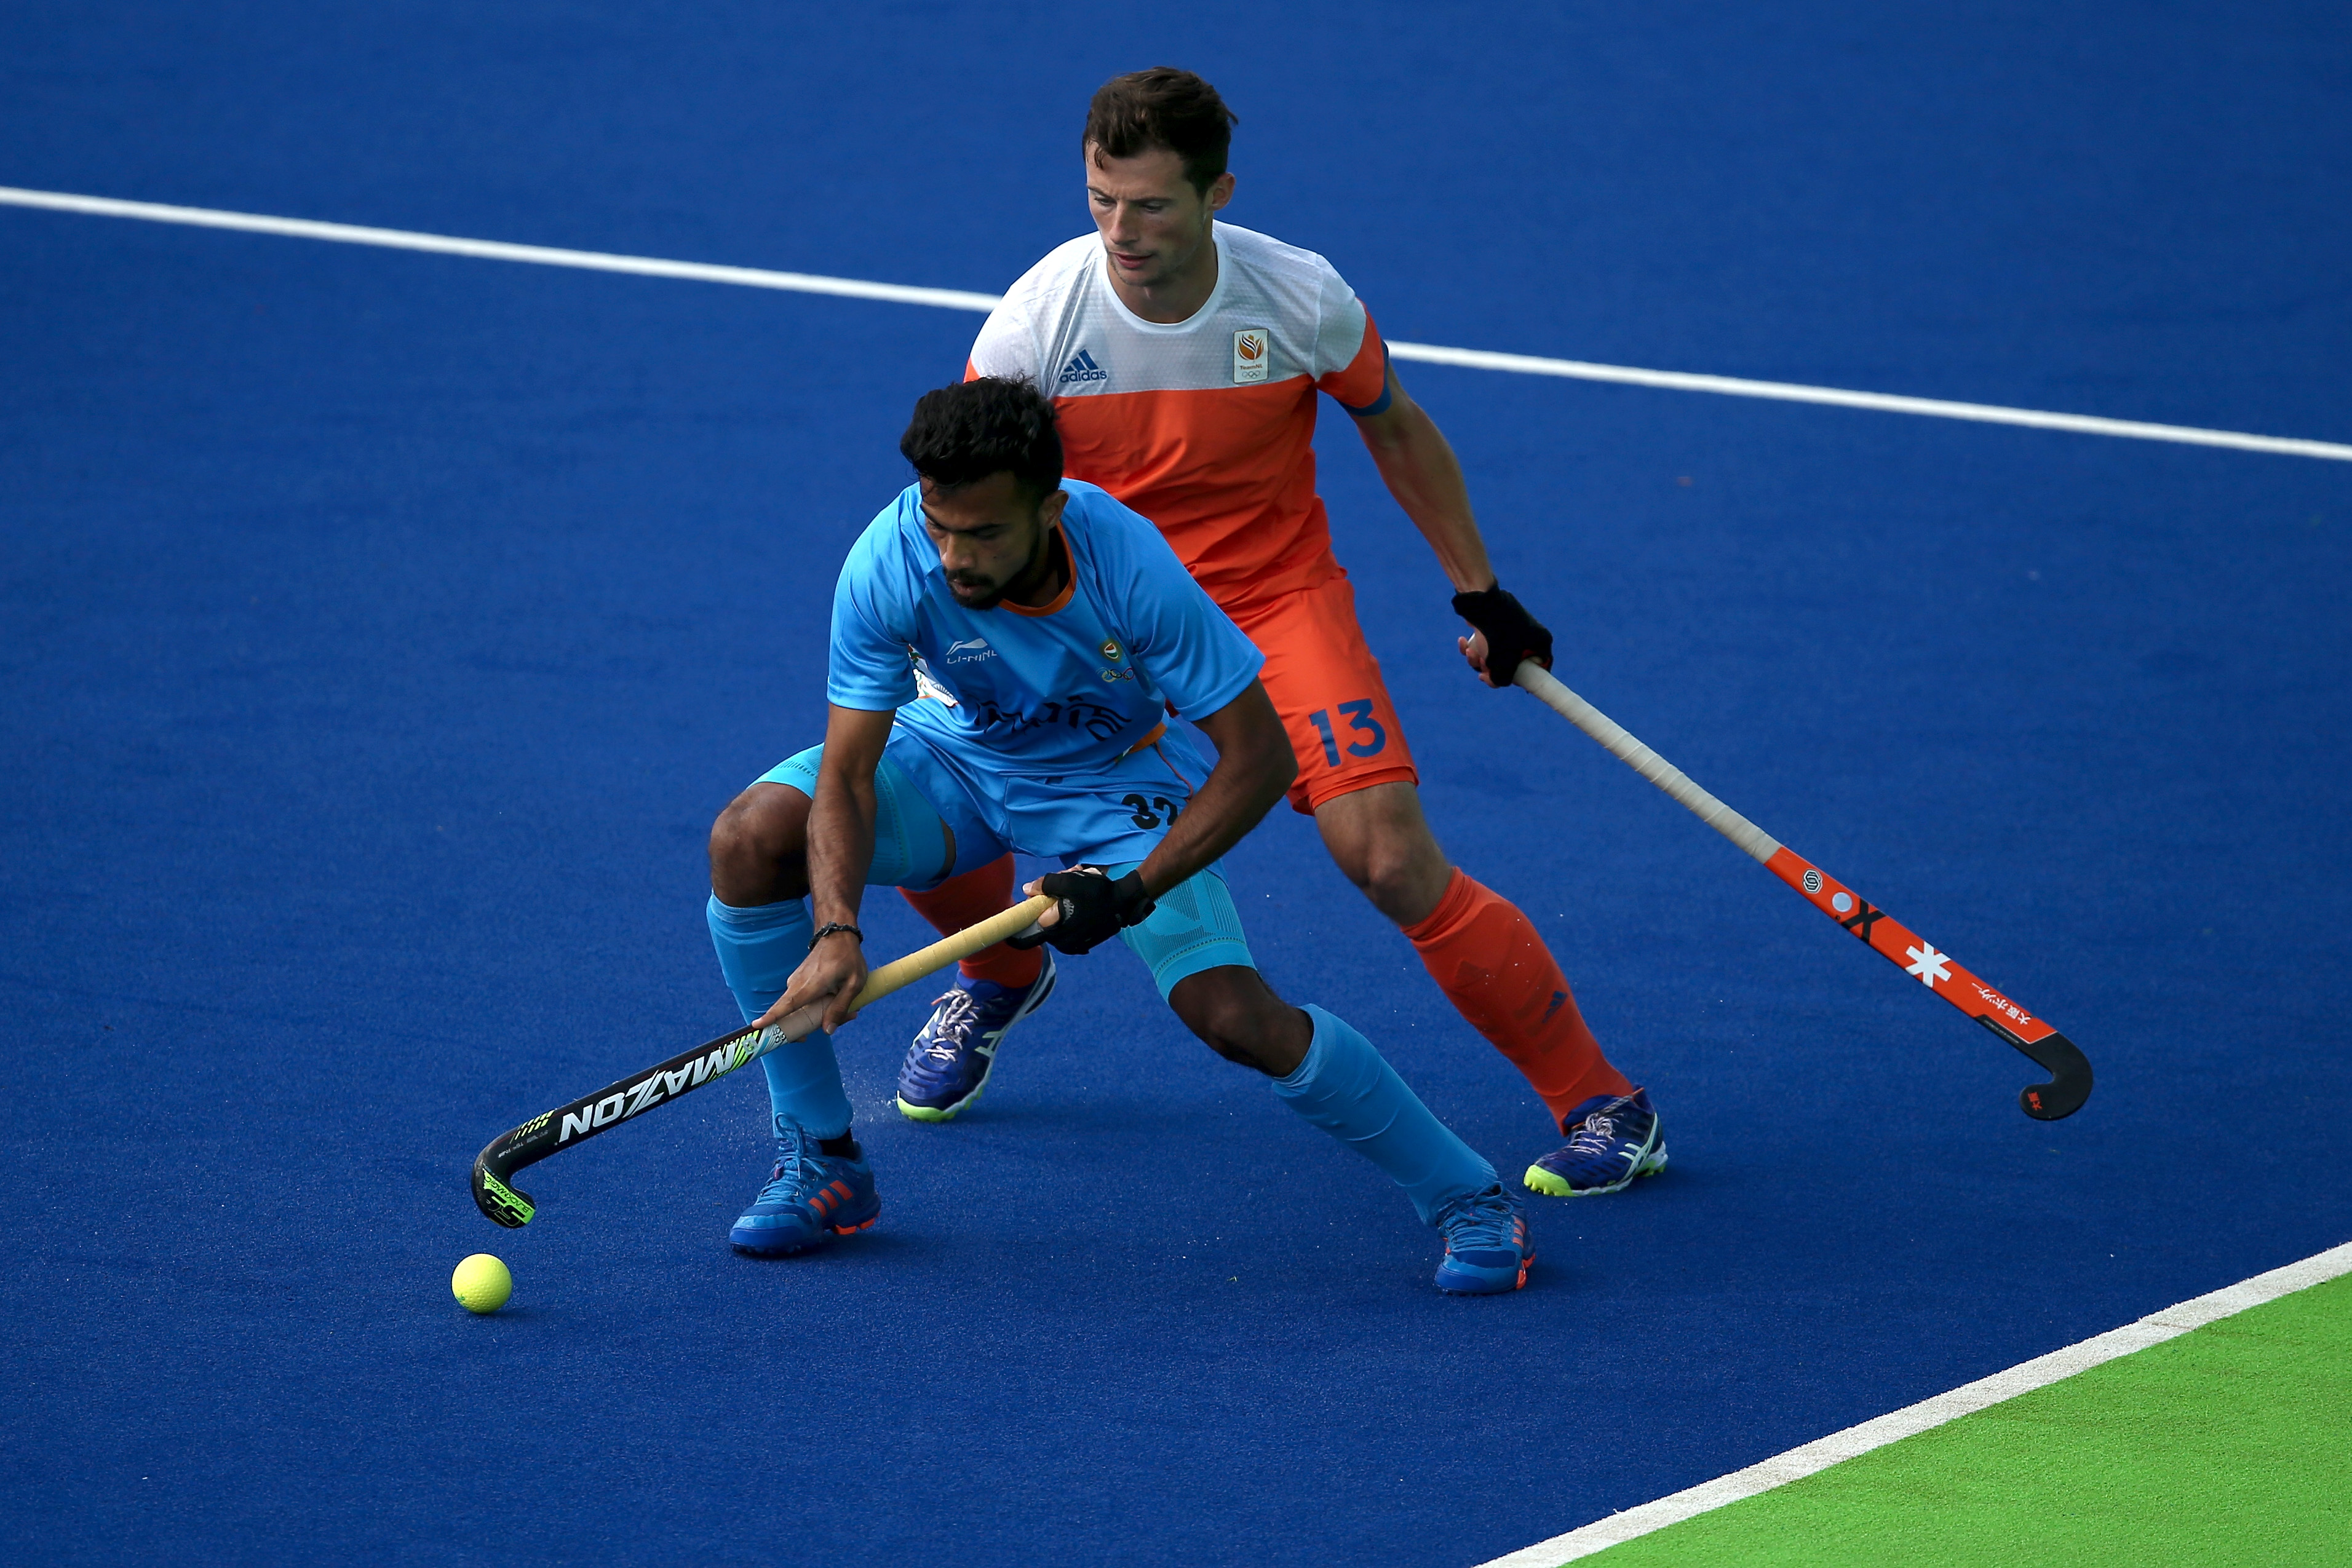 FIH Hockey Pro League | Playing India at home is always challenging, claims Max Caldas